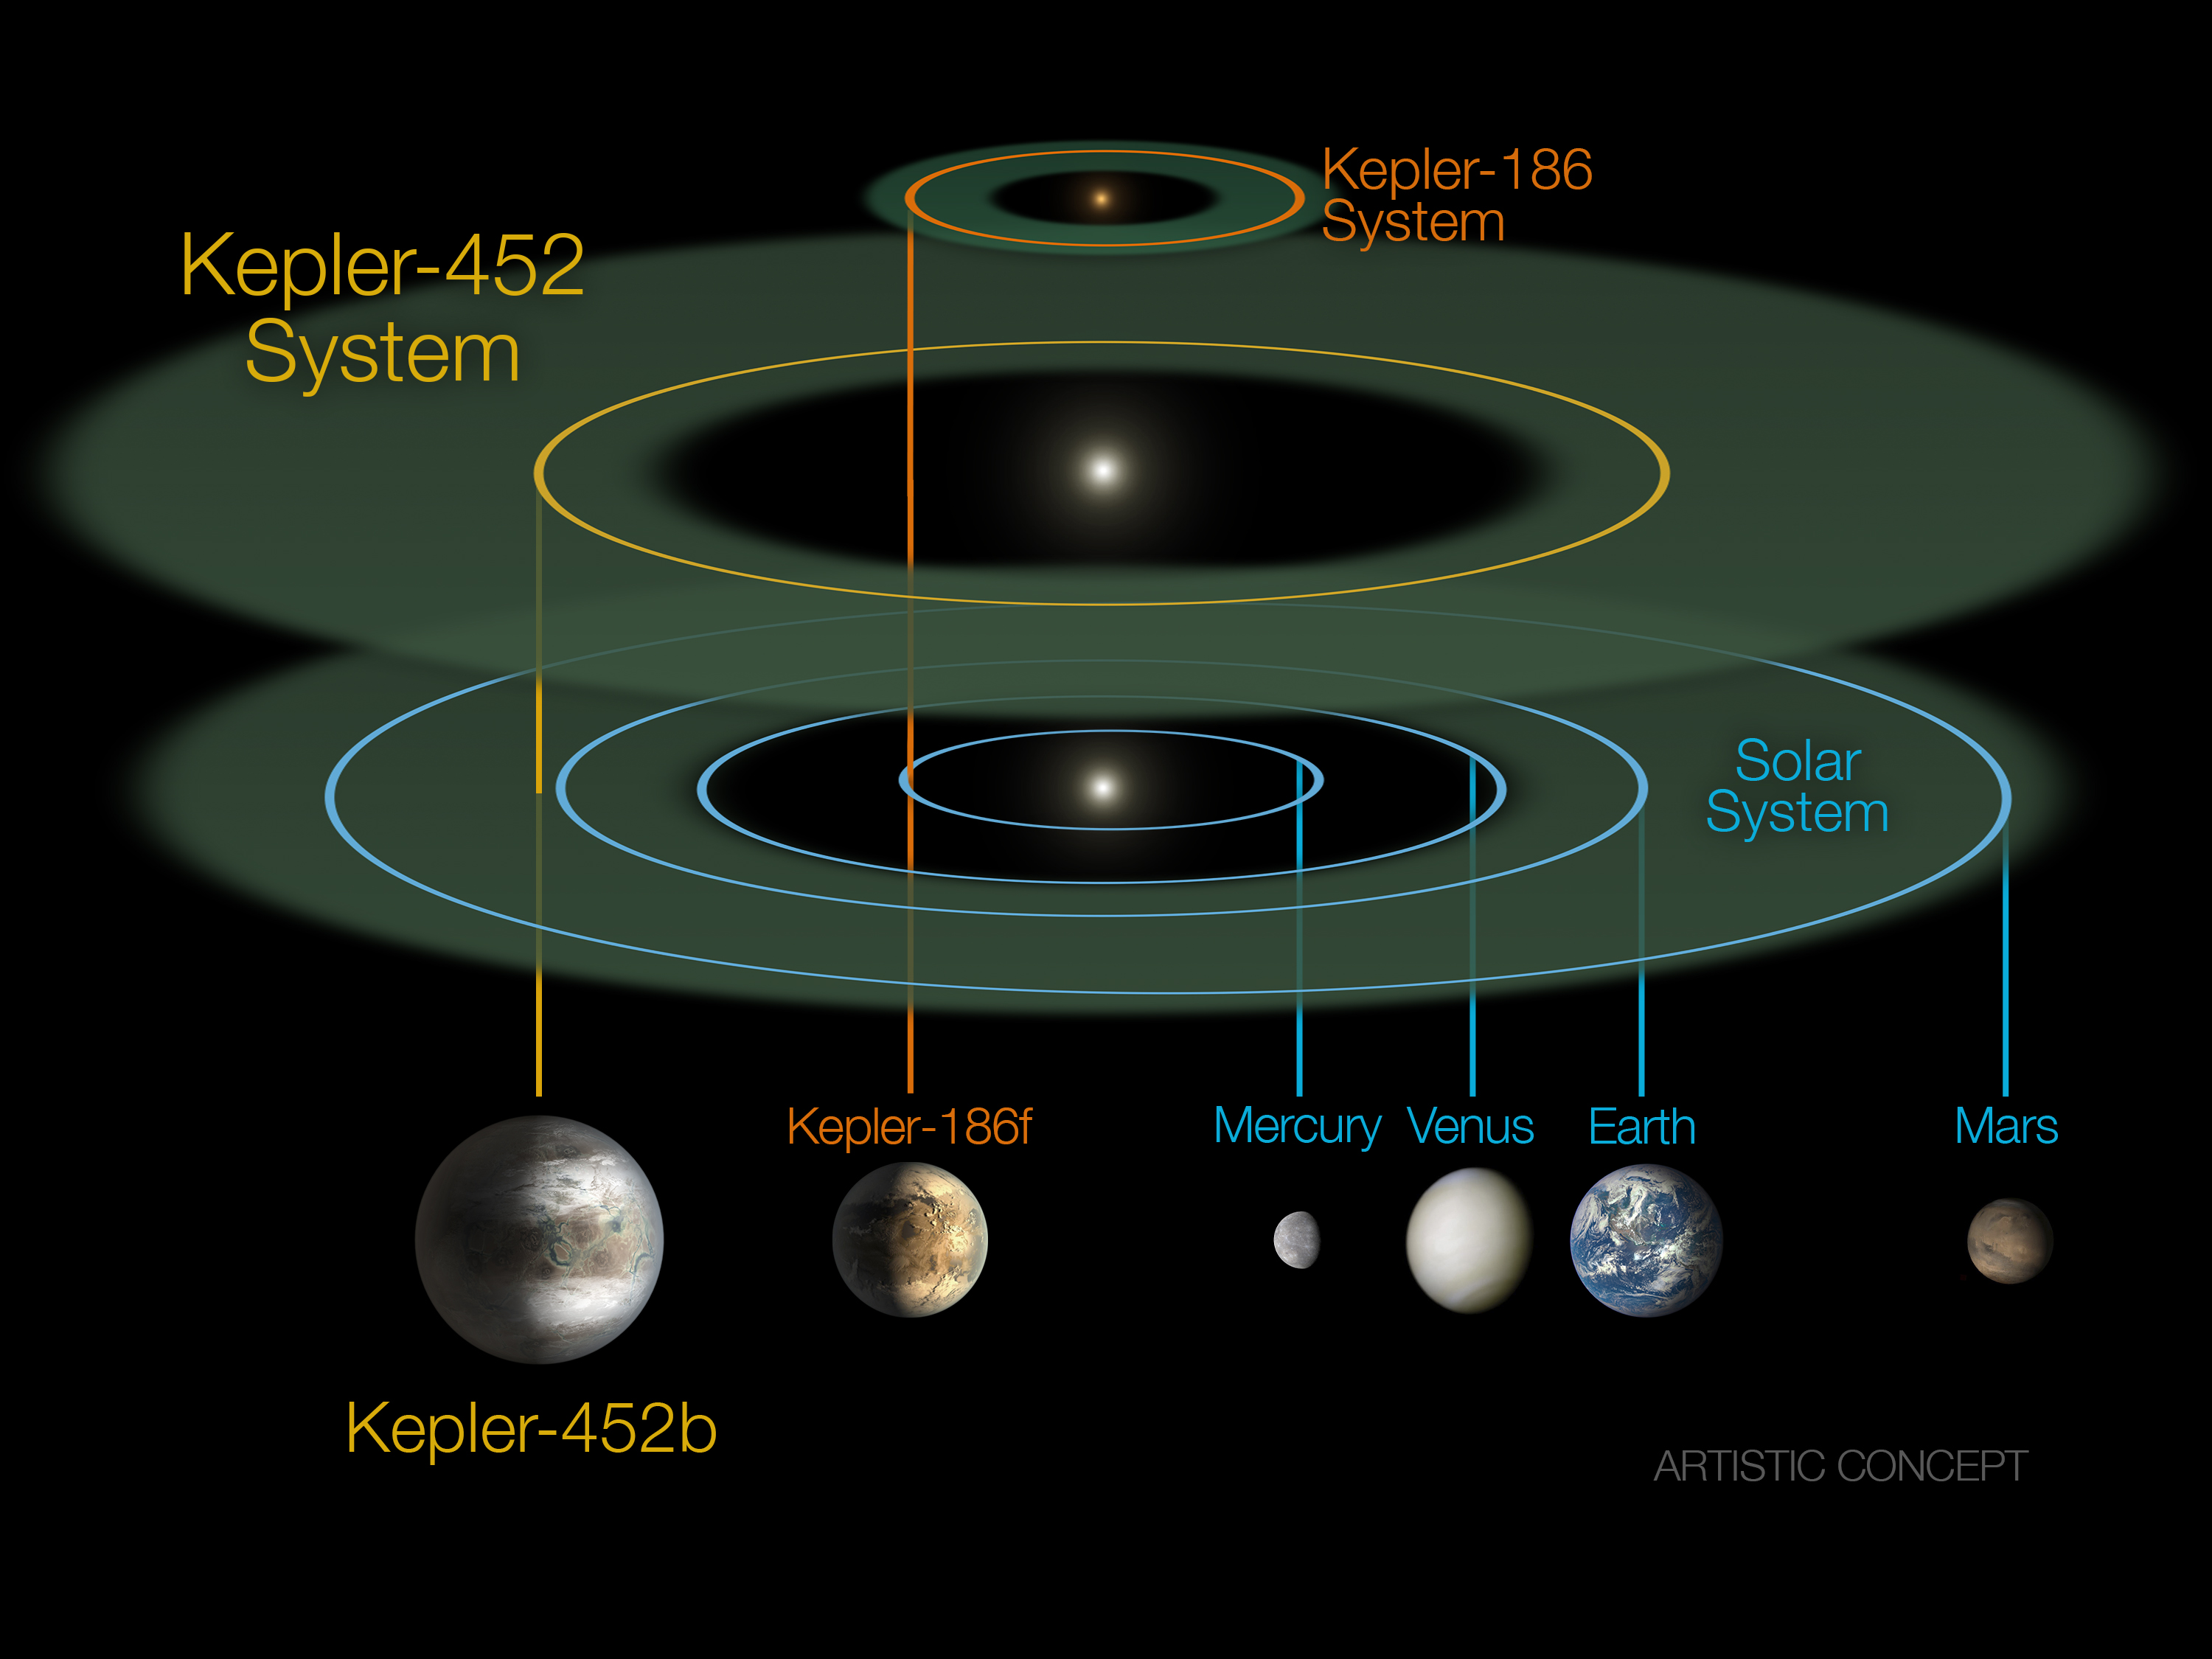 This size and scale of the Kepler-452 system compared alongside the Kepler-186 system and the solar system. Kepler-186 is a miniature solar system that would fit entirely inside the orbit of Mercury. The habitable zone of Kepler-186 is very small compared to that of Kepler-452 or the sun because it is a much smaller, cooler star. The size and extent of the habitable zone of Kepler-452 is nearly the same as that of the sun, but is slightly bigger because Kepler-452 is somewhat older, bigger and brighter. The size of the orbit of Kepler-452b is nearly the same as that of the Earth at 1.05 AU. Kepler-452b orbits its star once every 385 days. Credit: NASA/JPL-CalTech/R. Hurt